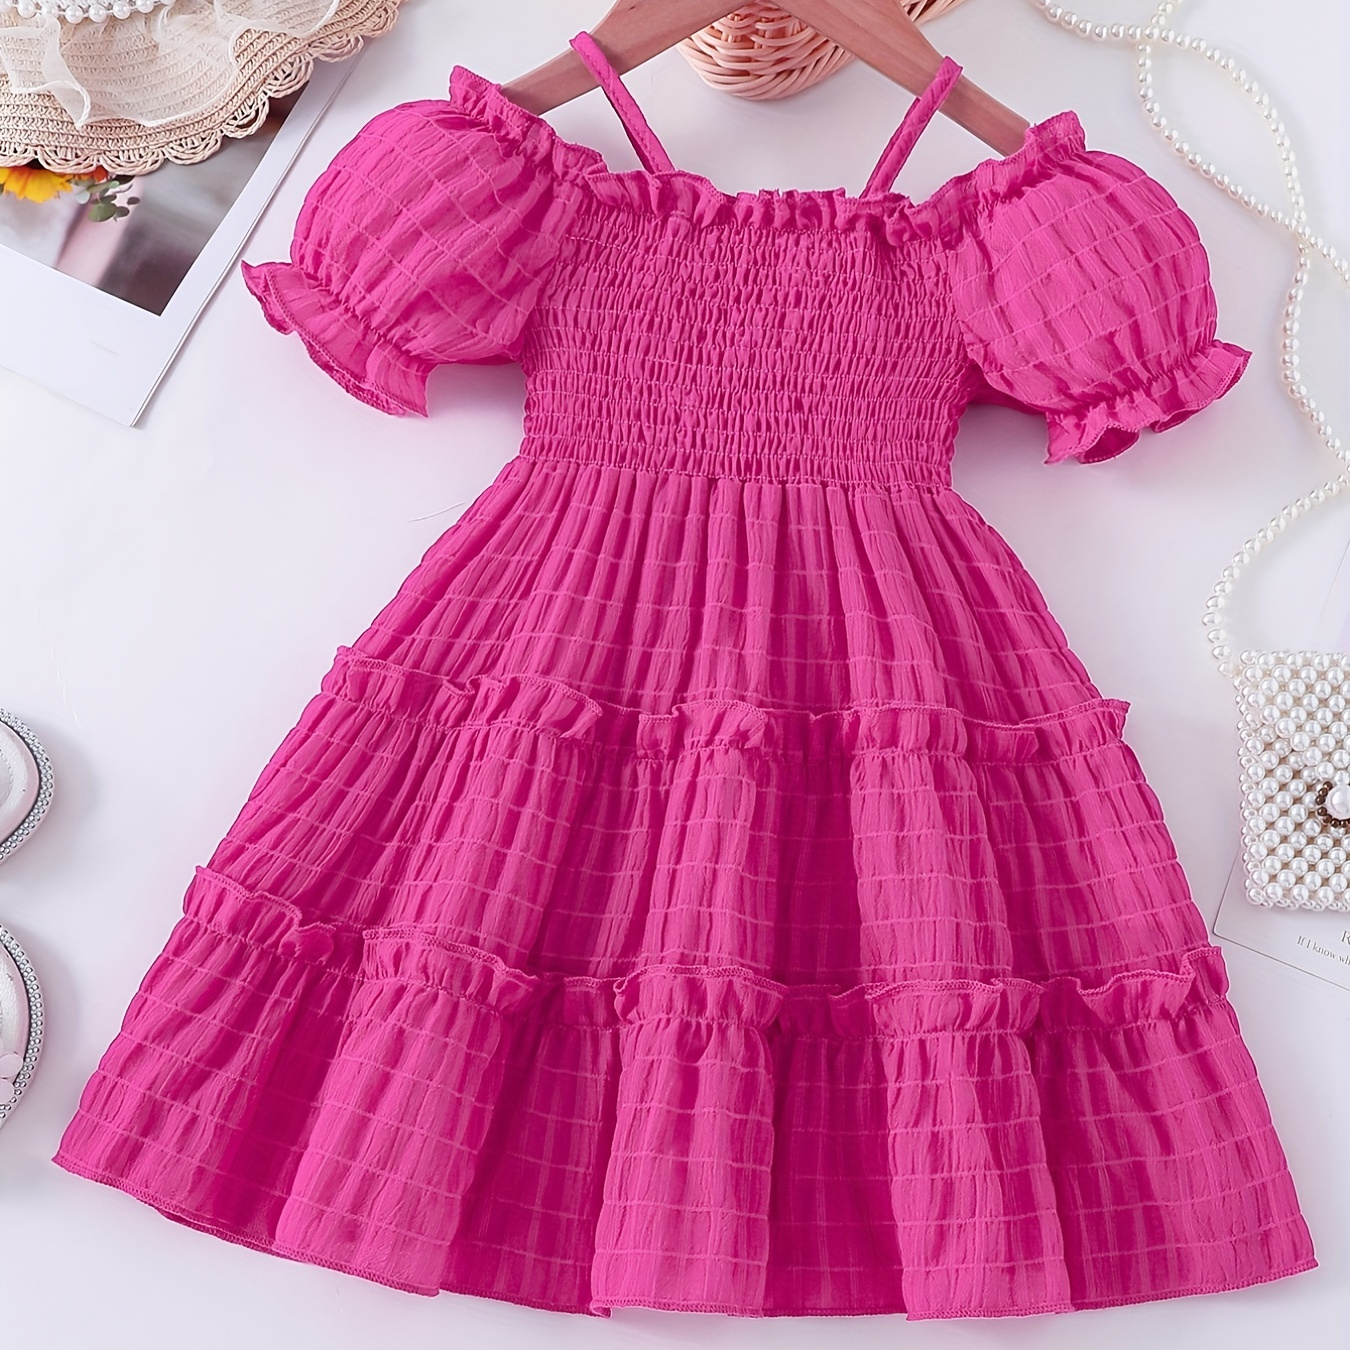 

Toddler Girls Puff Sleeve Frill Trim Shirred Cold Shoulder Princess Dress For Party Beach Vacation Kids Summer Clothes